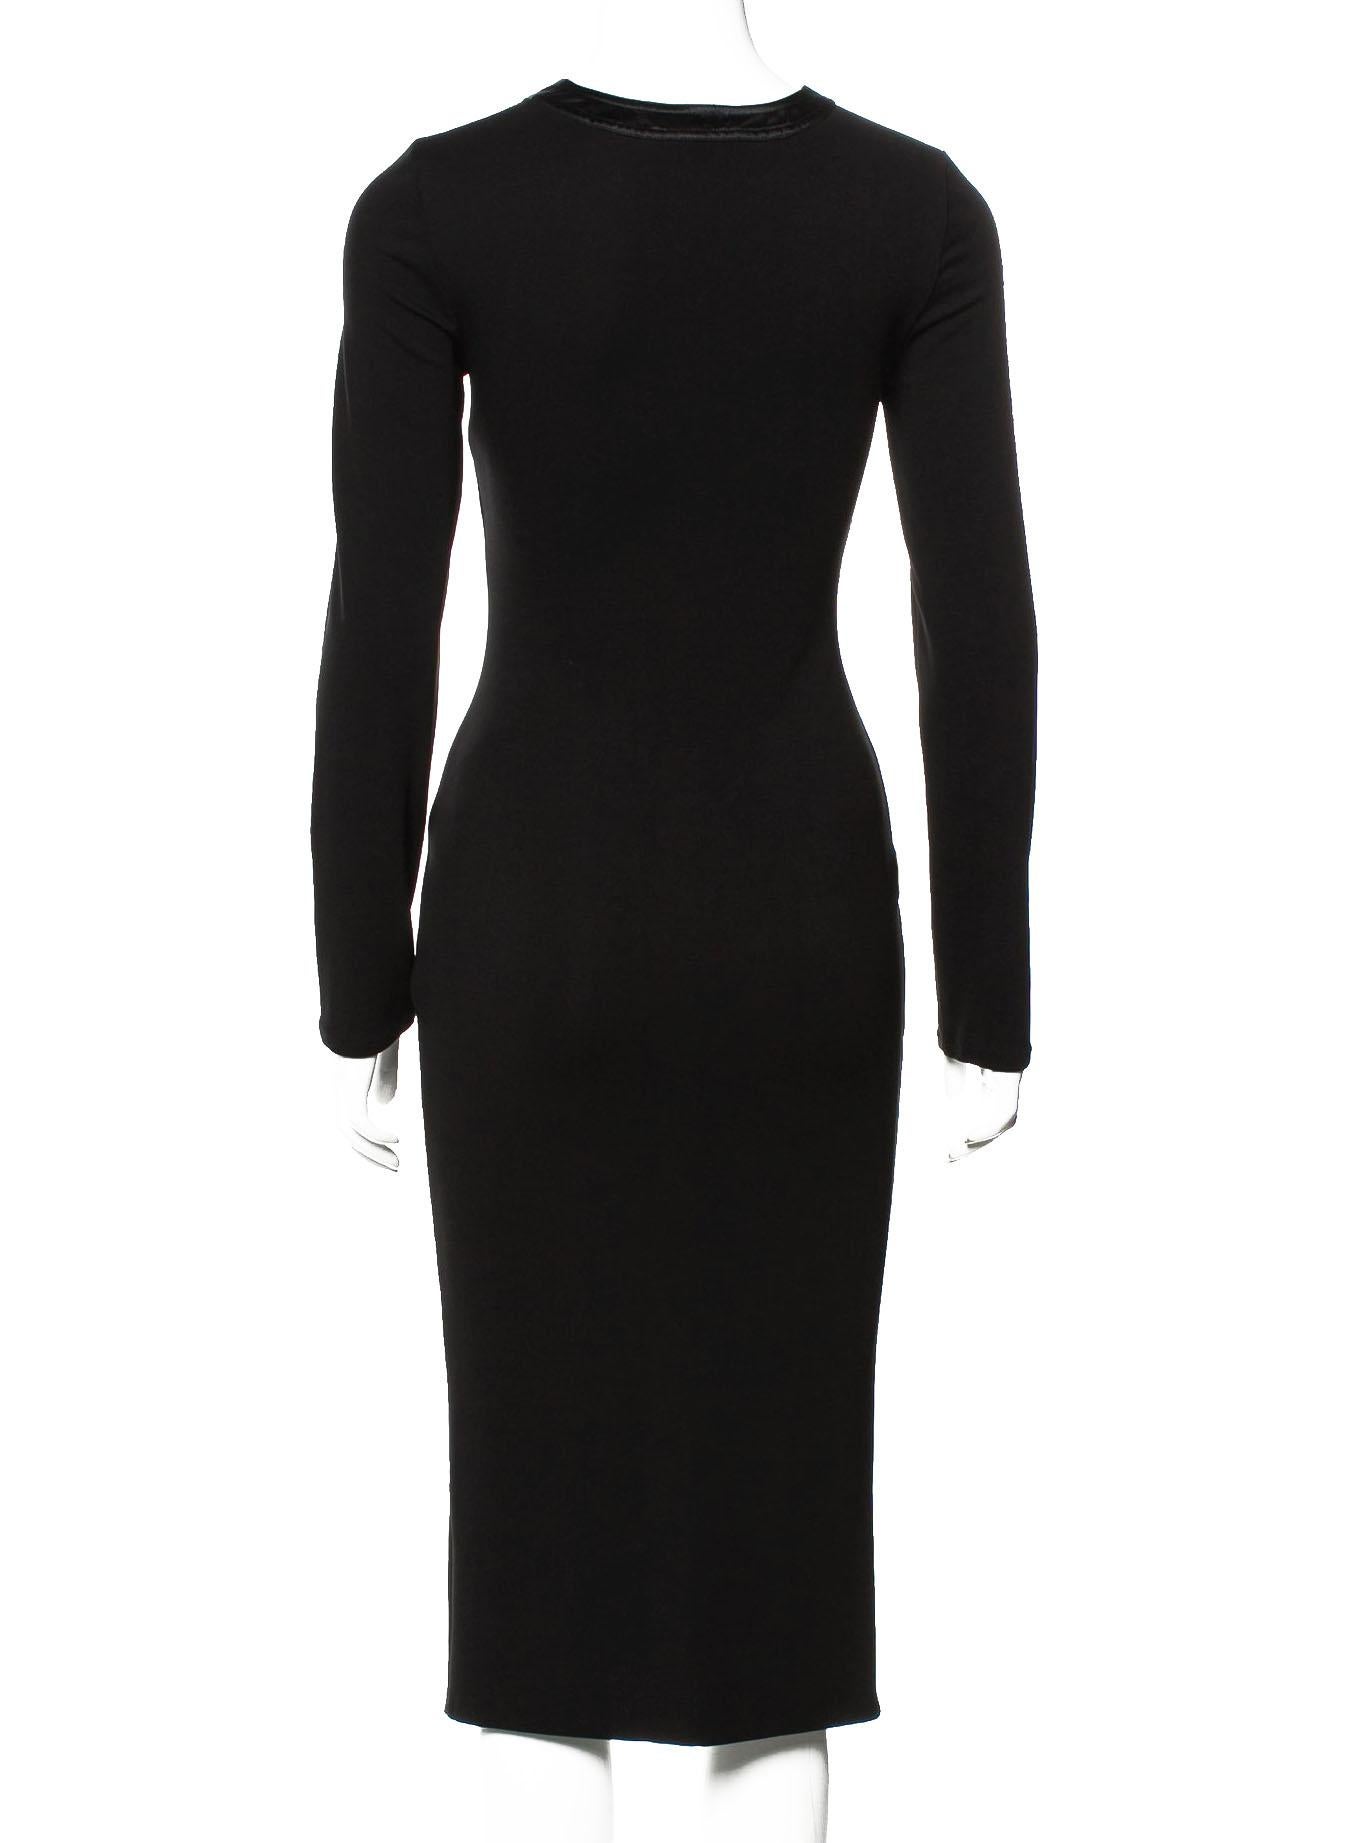 Tom Ford for Gucci Black Stretch Dress
F/W 2002 Collection
Designer size - 38
Deep V-neck style, Black satin trim, Removable tie, Very stretch.
Made in Italy
Excellent new condition.

Listing code: 02202054580224958